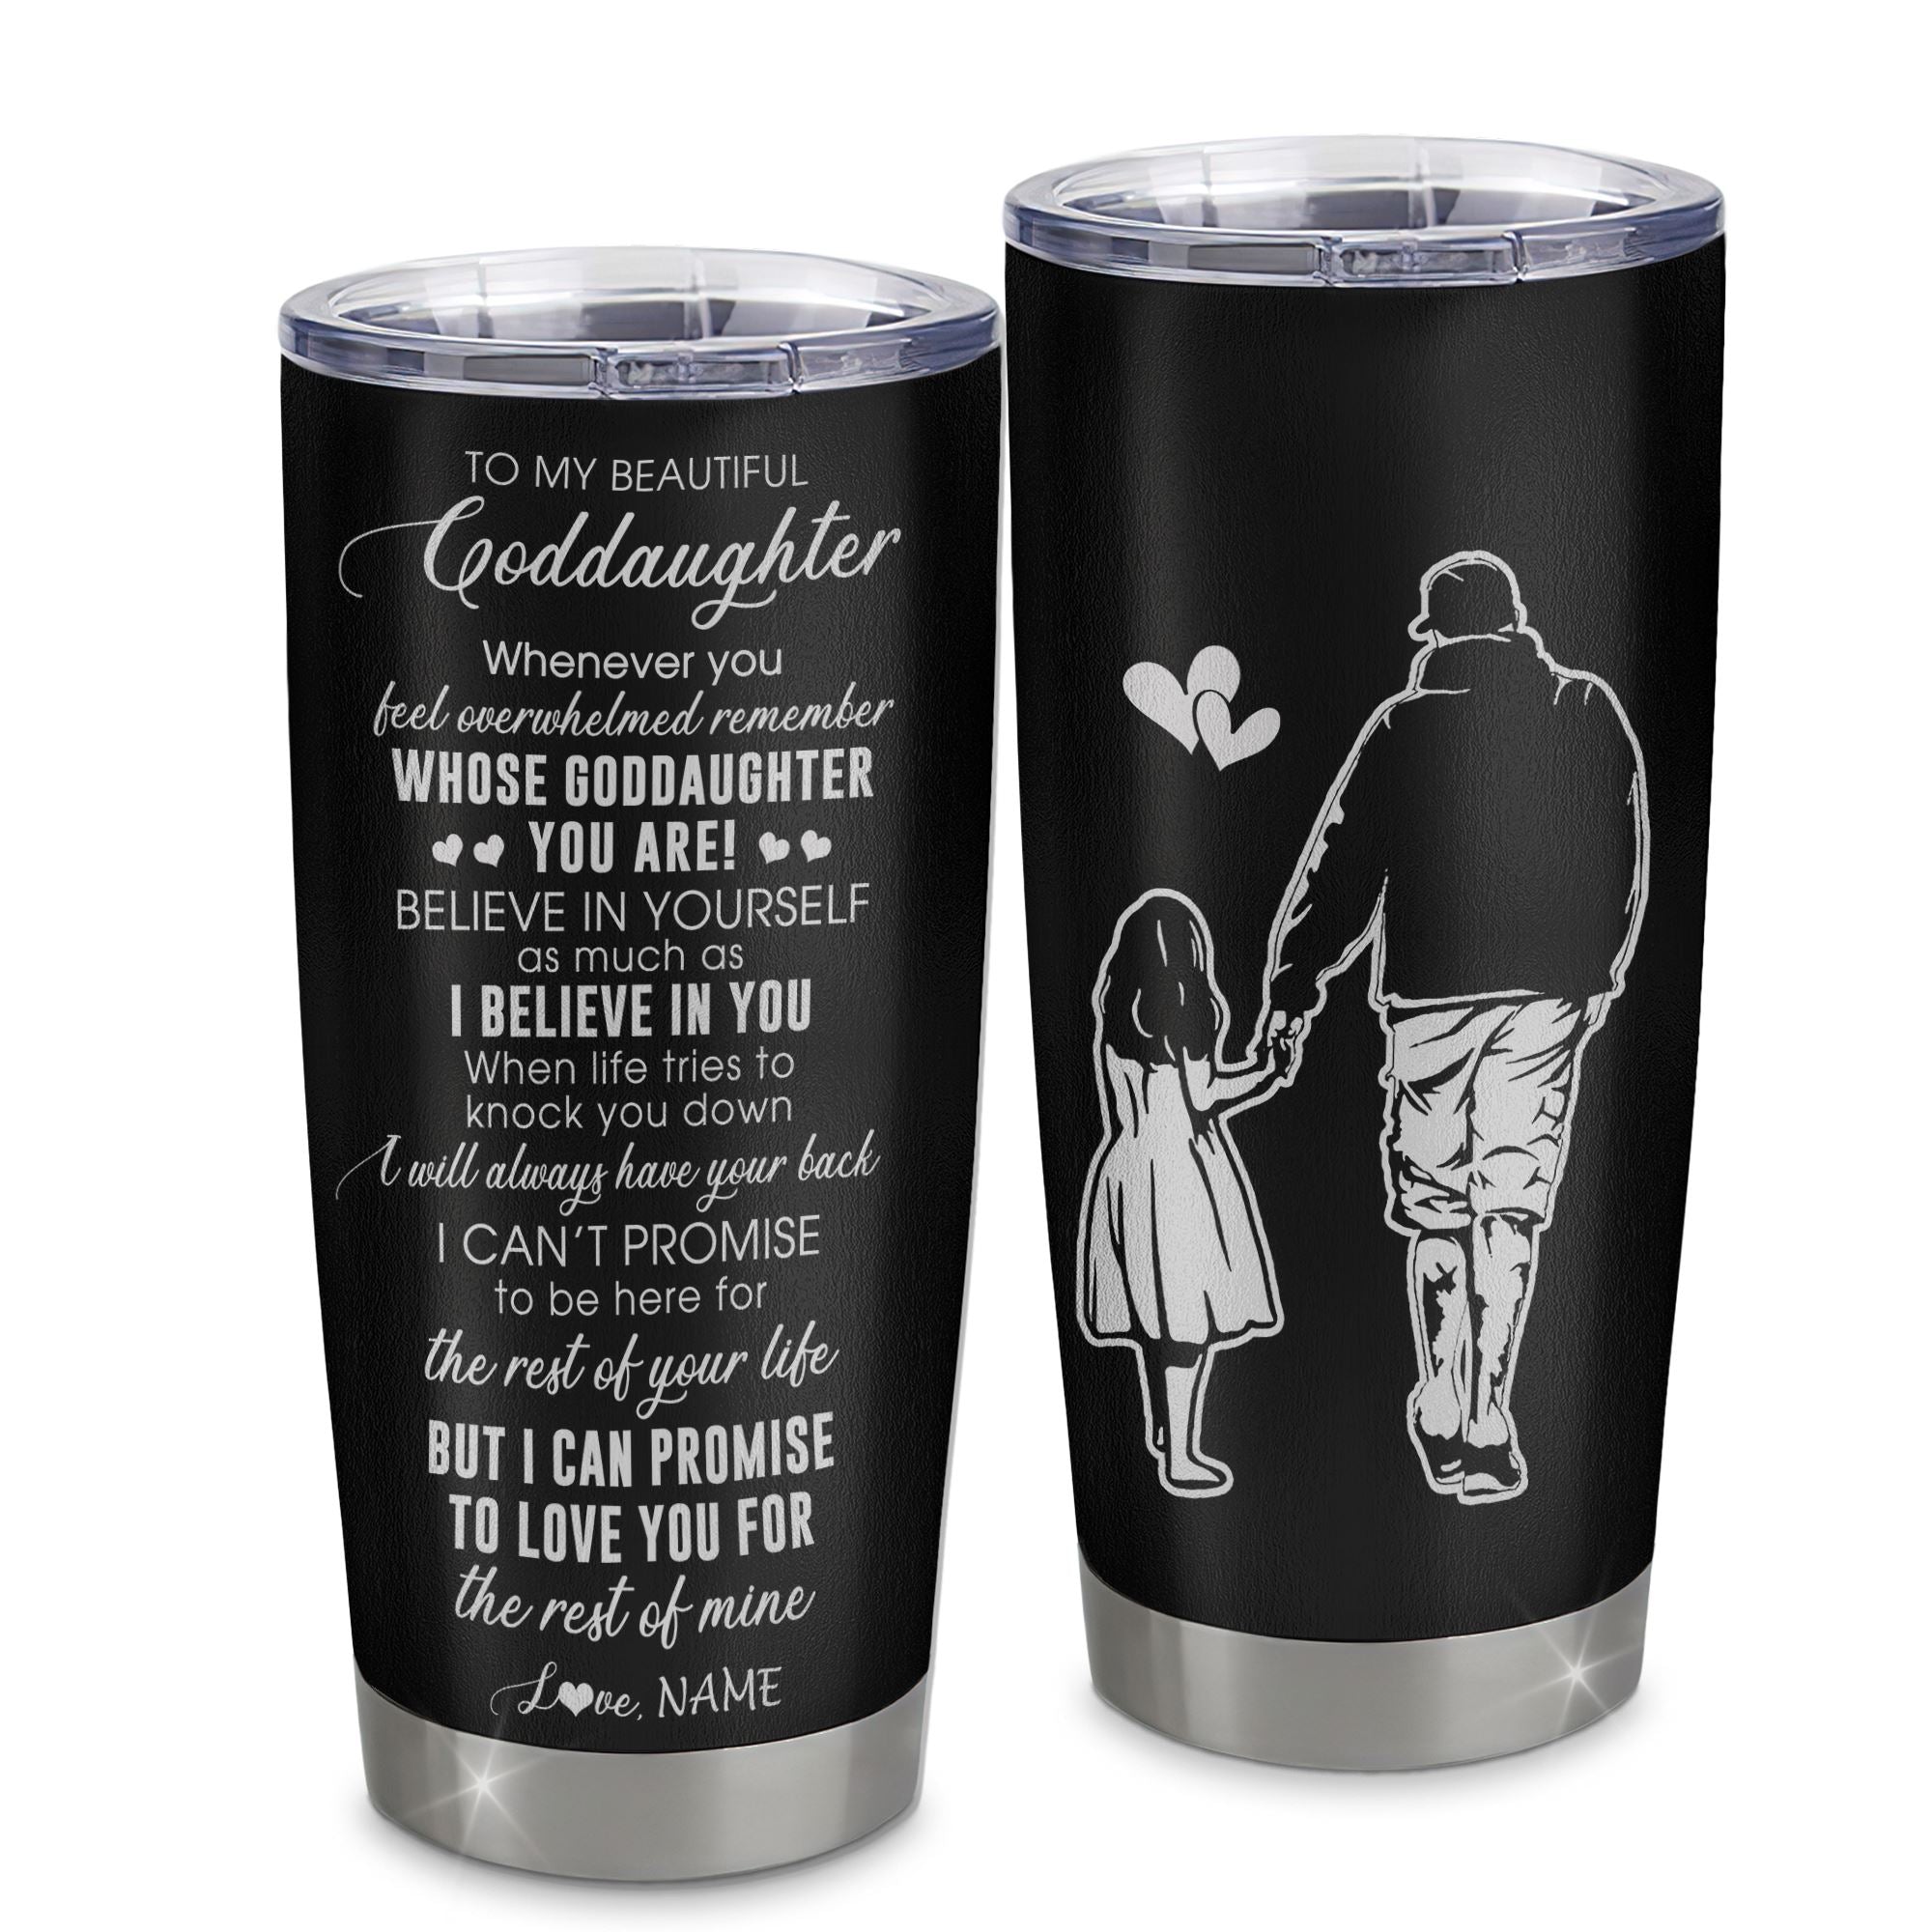 Personalized_To_My_Goddaughter_Tumbler_From_Godfather_Stainless_Steel_Cup_Whenever_You_Feel_Overwhelmed_Goddaughter_Birthday_Christmas_Travel_Mug_Tumbler_mockup_1.jpg